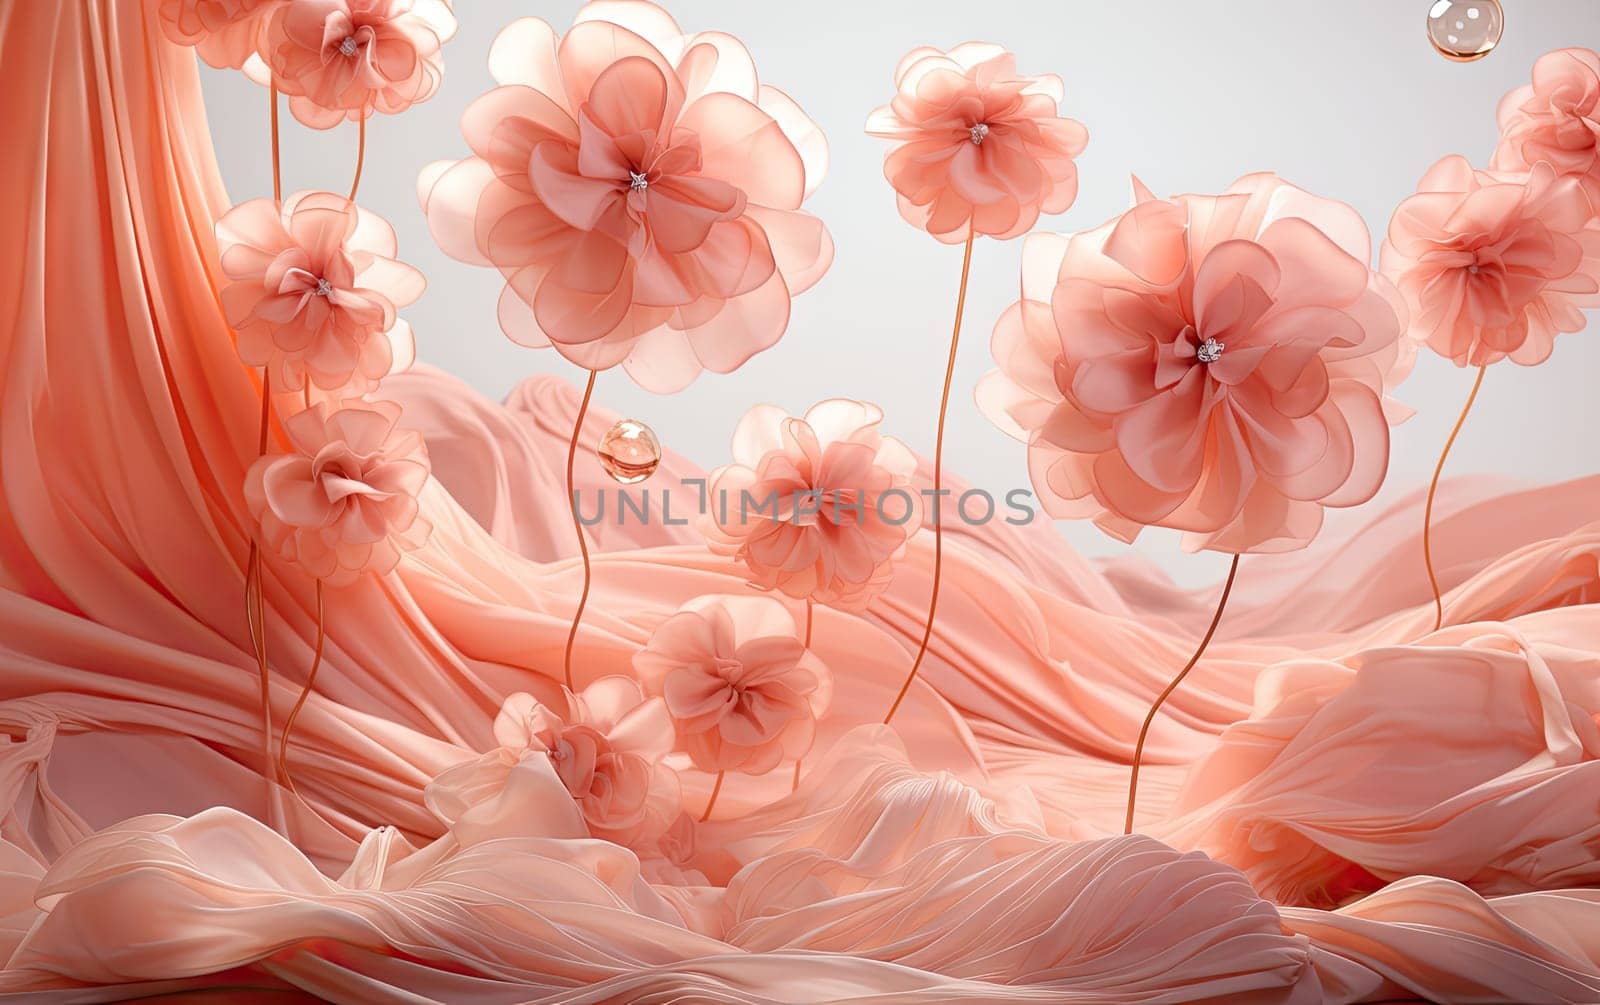 Maternity backMaternity background or elegant wedding backdrop Mansion hall ballroom interior with pink flower decorations and balloons.ground or elegant wedding backdrop Mansion hall ballroom interior with pink flower decorations and balloons